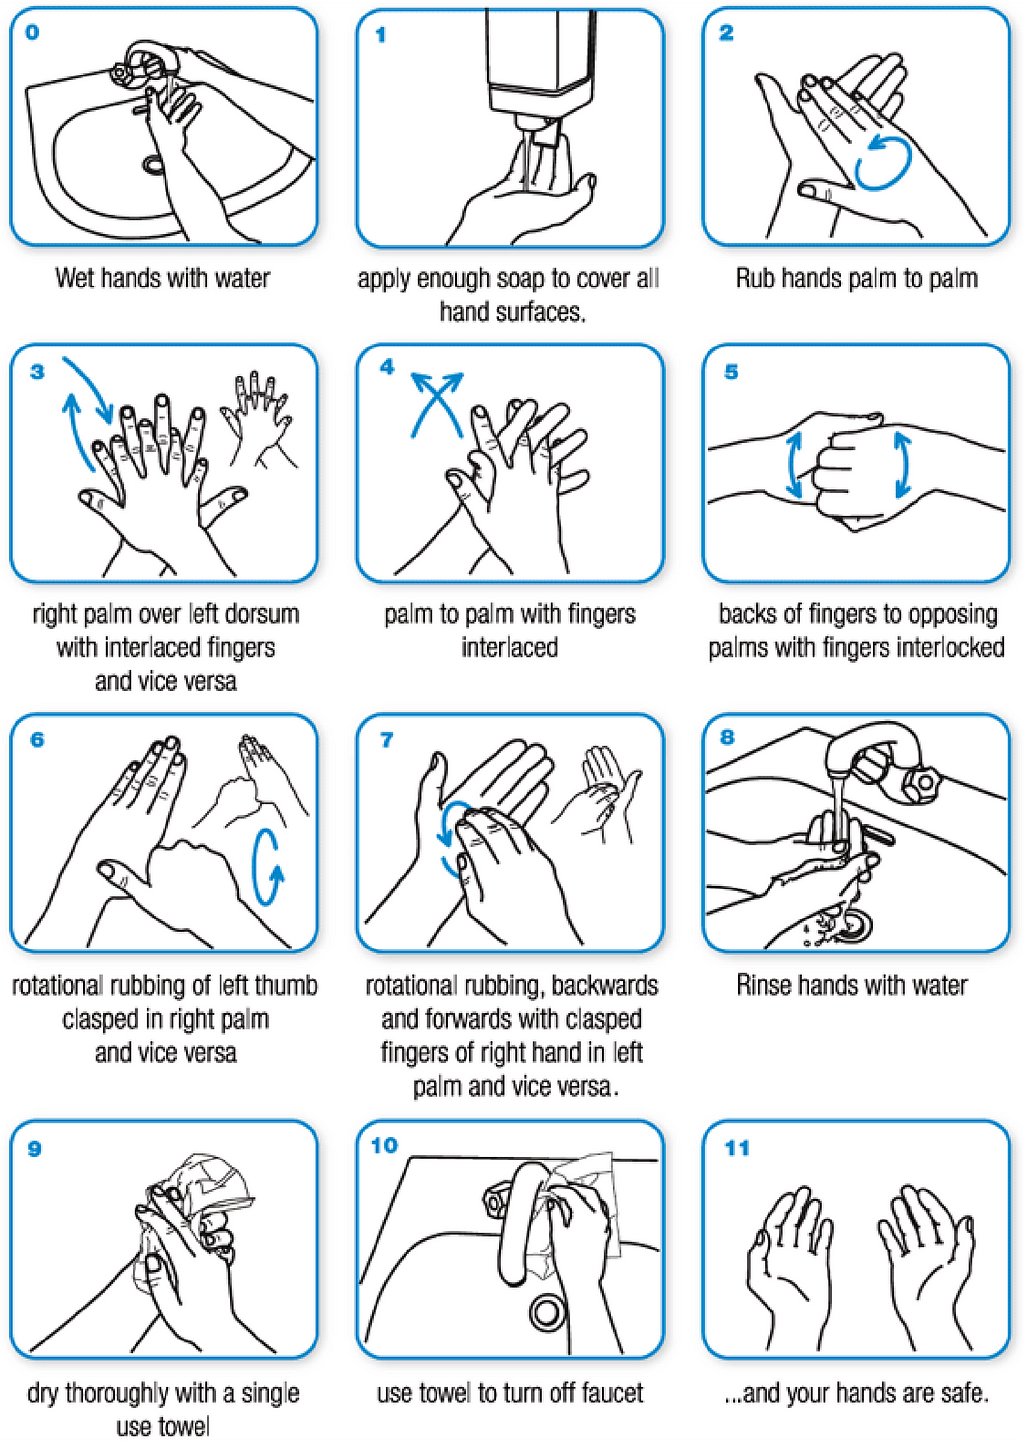 The World Health Organization’s illustration on how to wash your hands